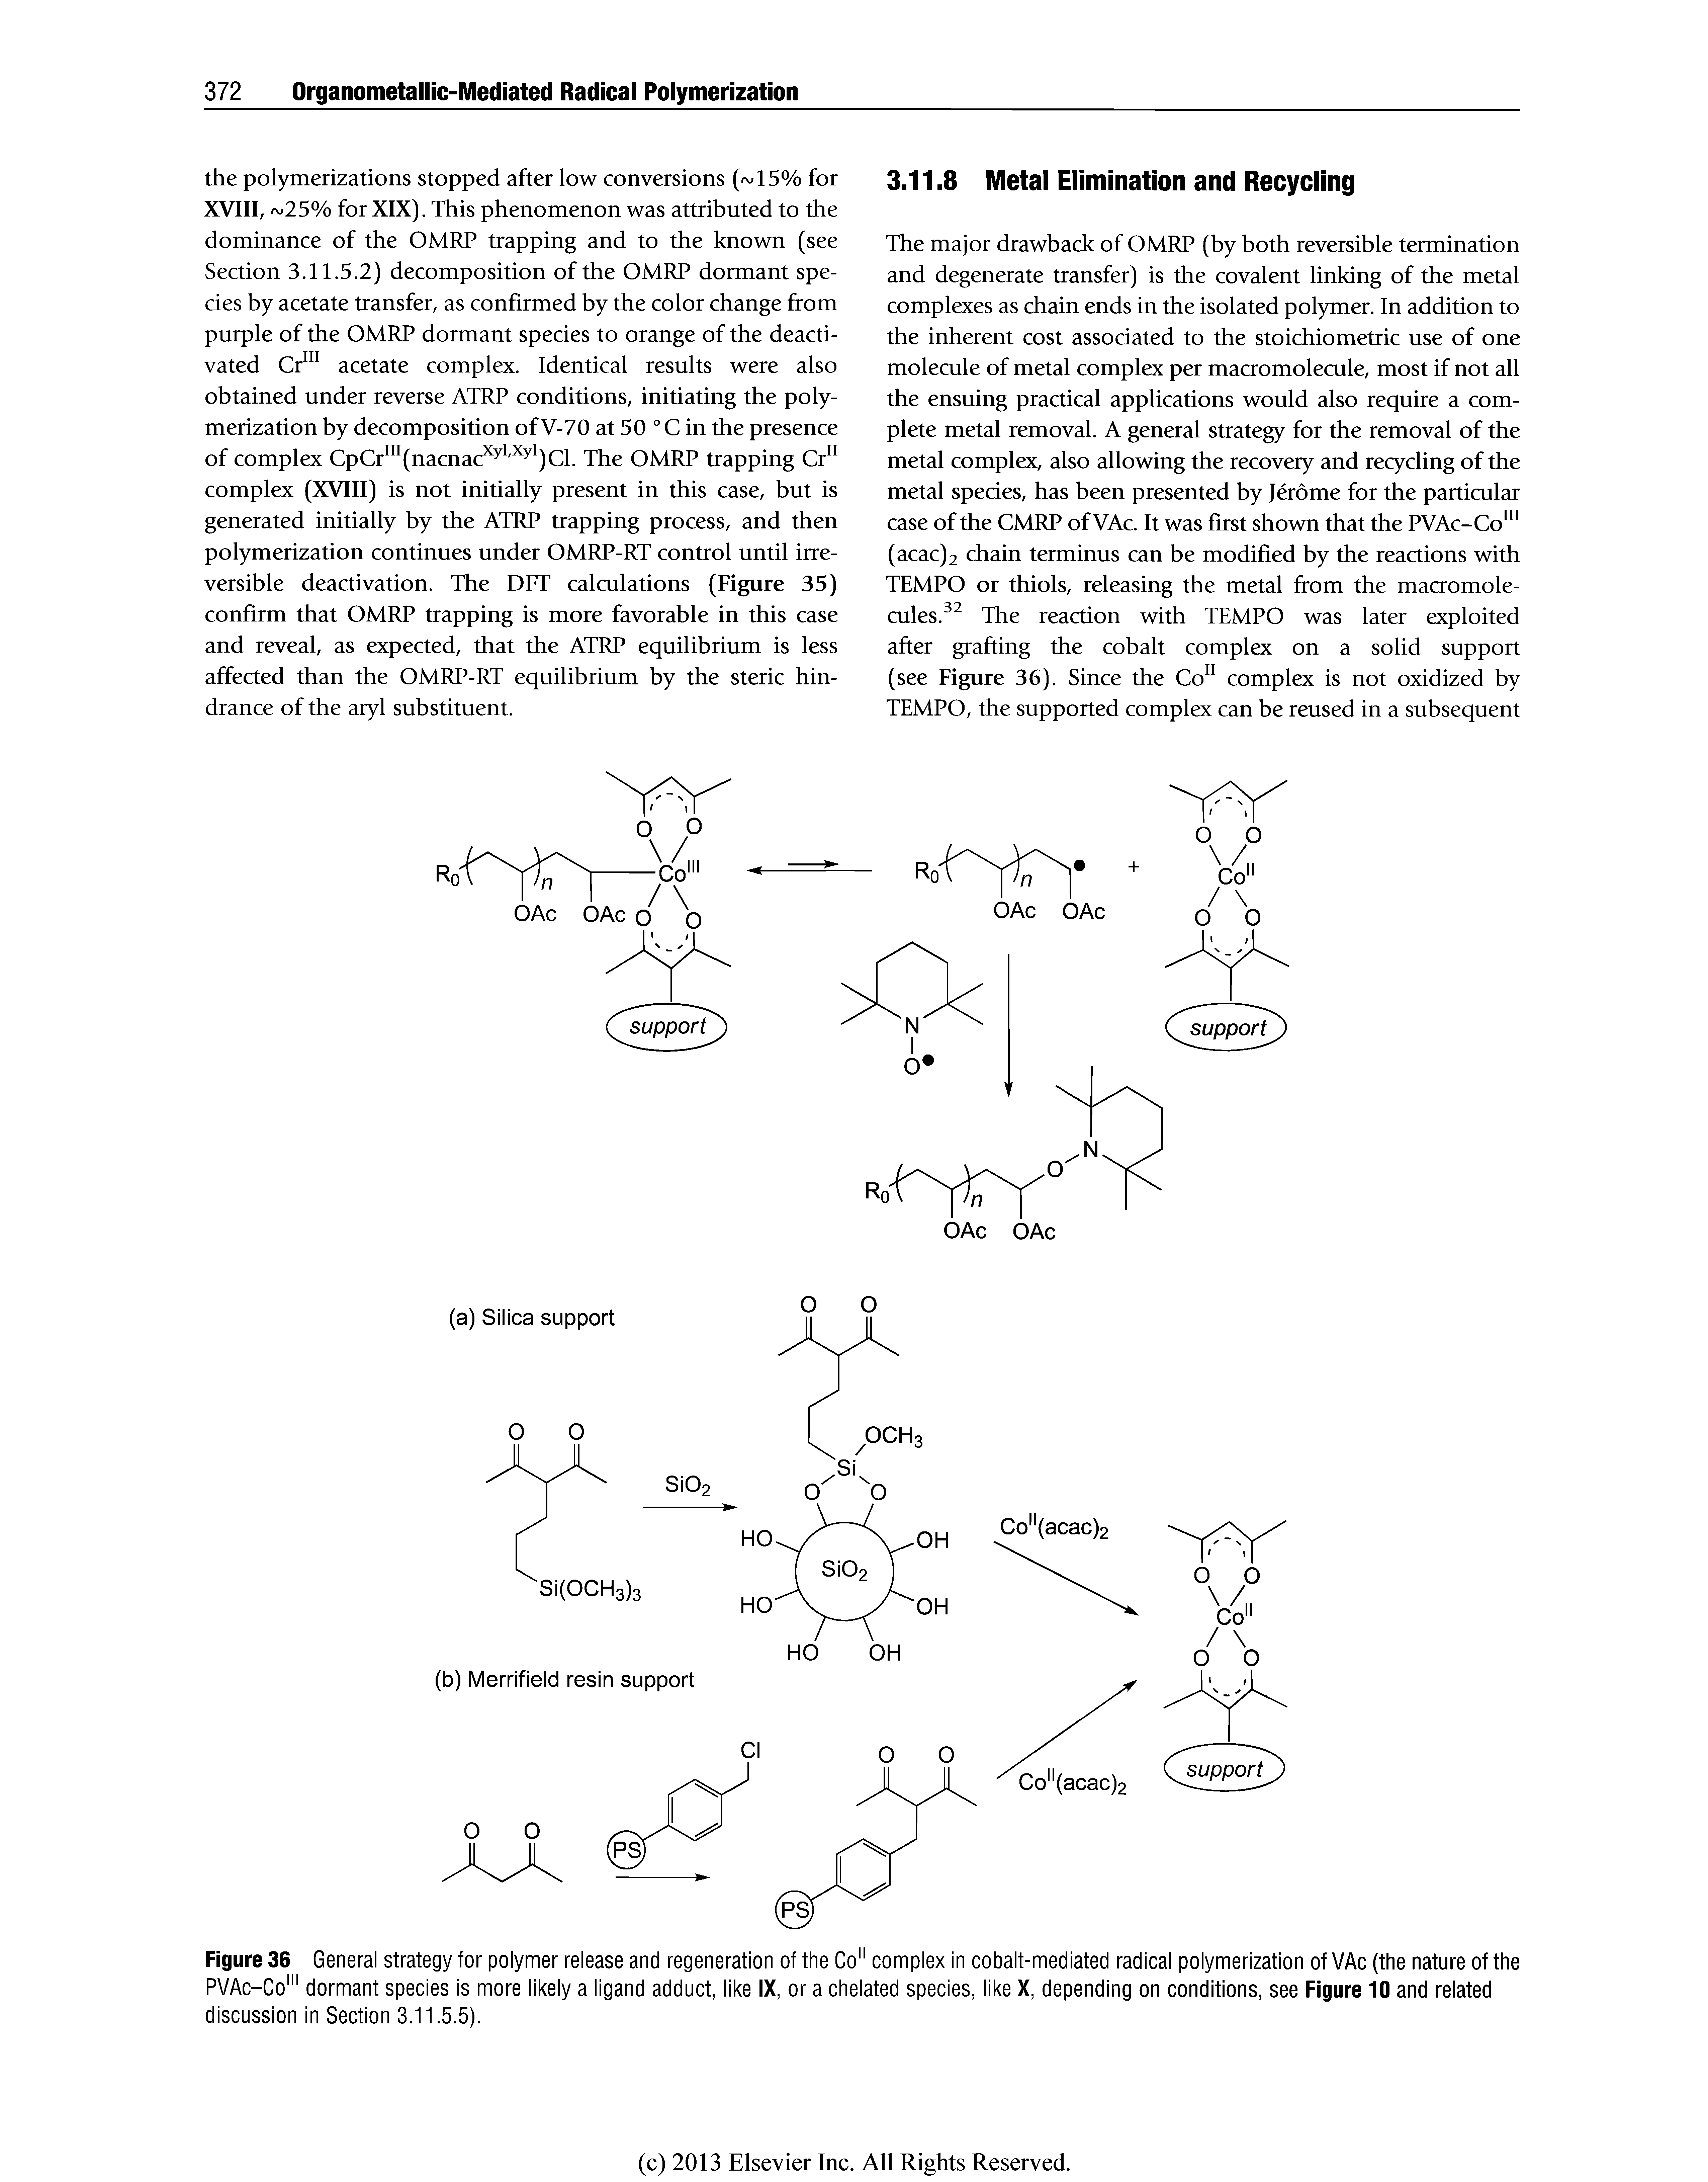 Figure 36 General strategy for polymer release and regeneration of the Co" complex in cobalt-mediated radical polymerization of VAc (the nature of the PVAc-Co" dormant species is more likely a ligand adduct, like IX, or a chelated species, like X, depending on conditions, see Figure 10 and related discussion in Section 3.11.5.5).